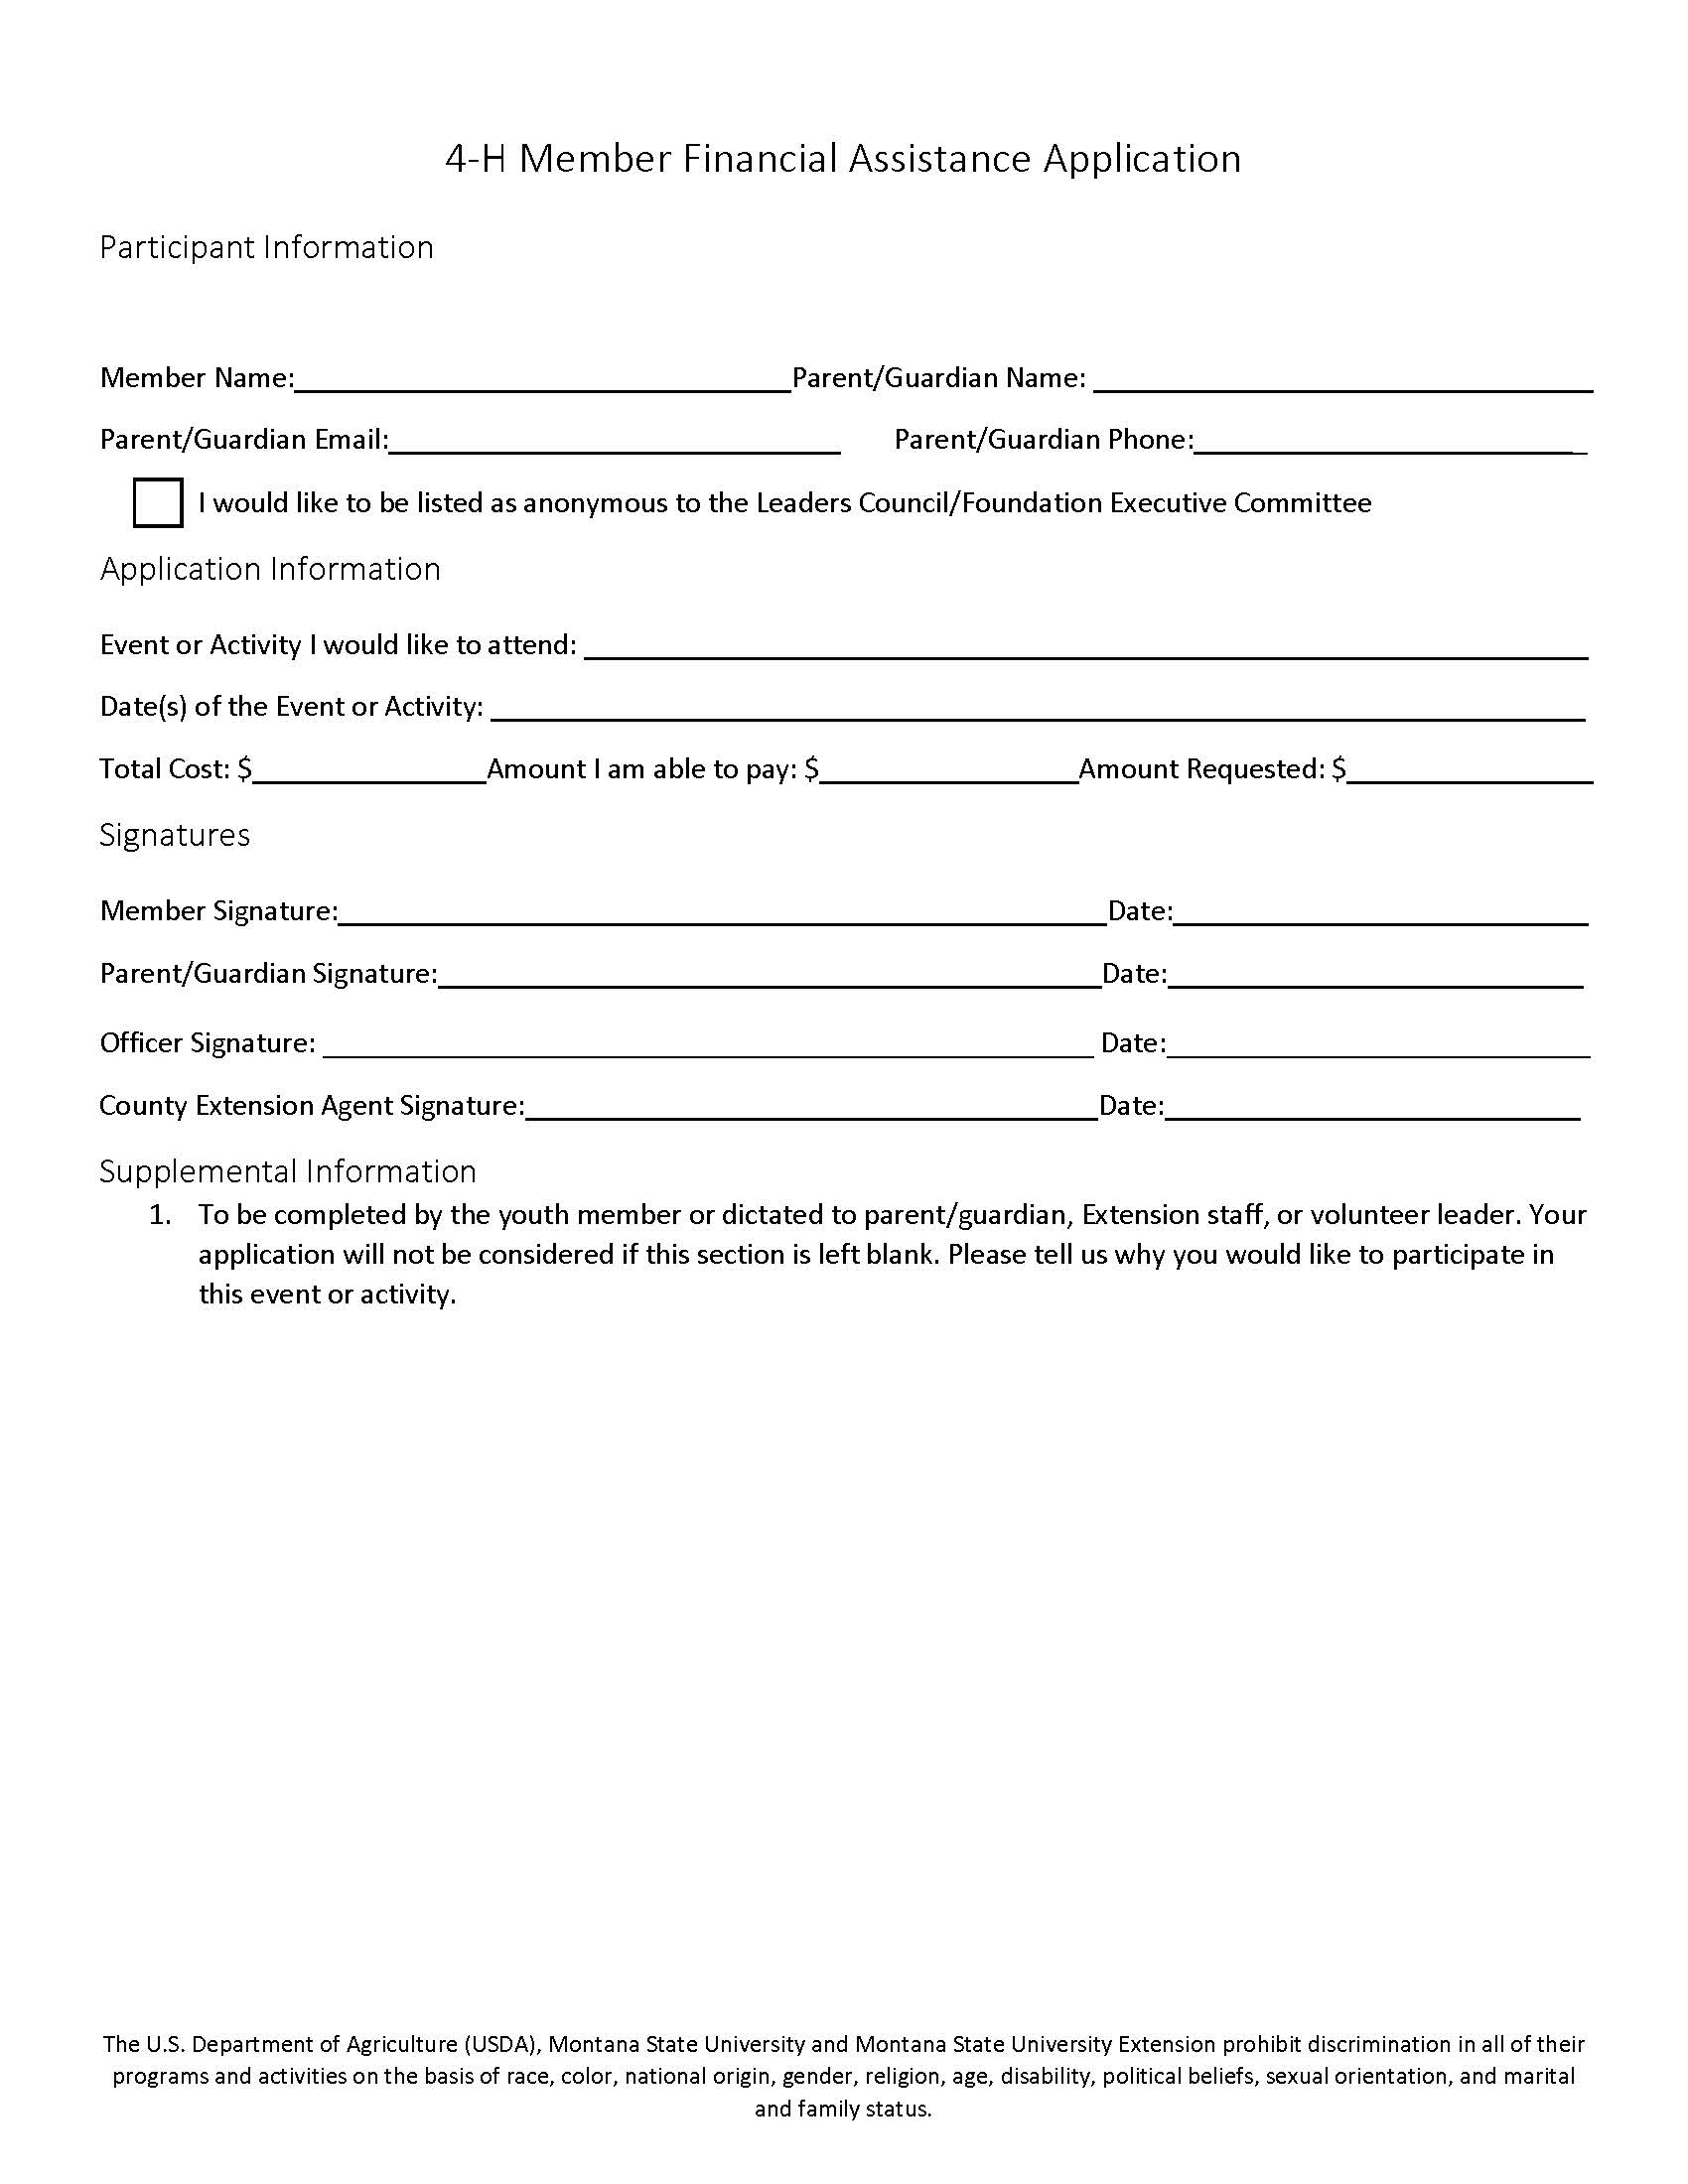 Page one of the 4-H Member Financial Assistance Application